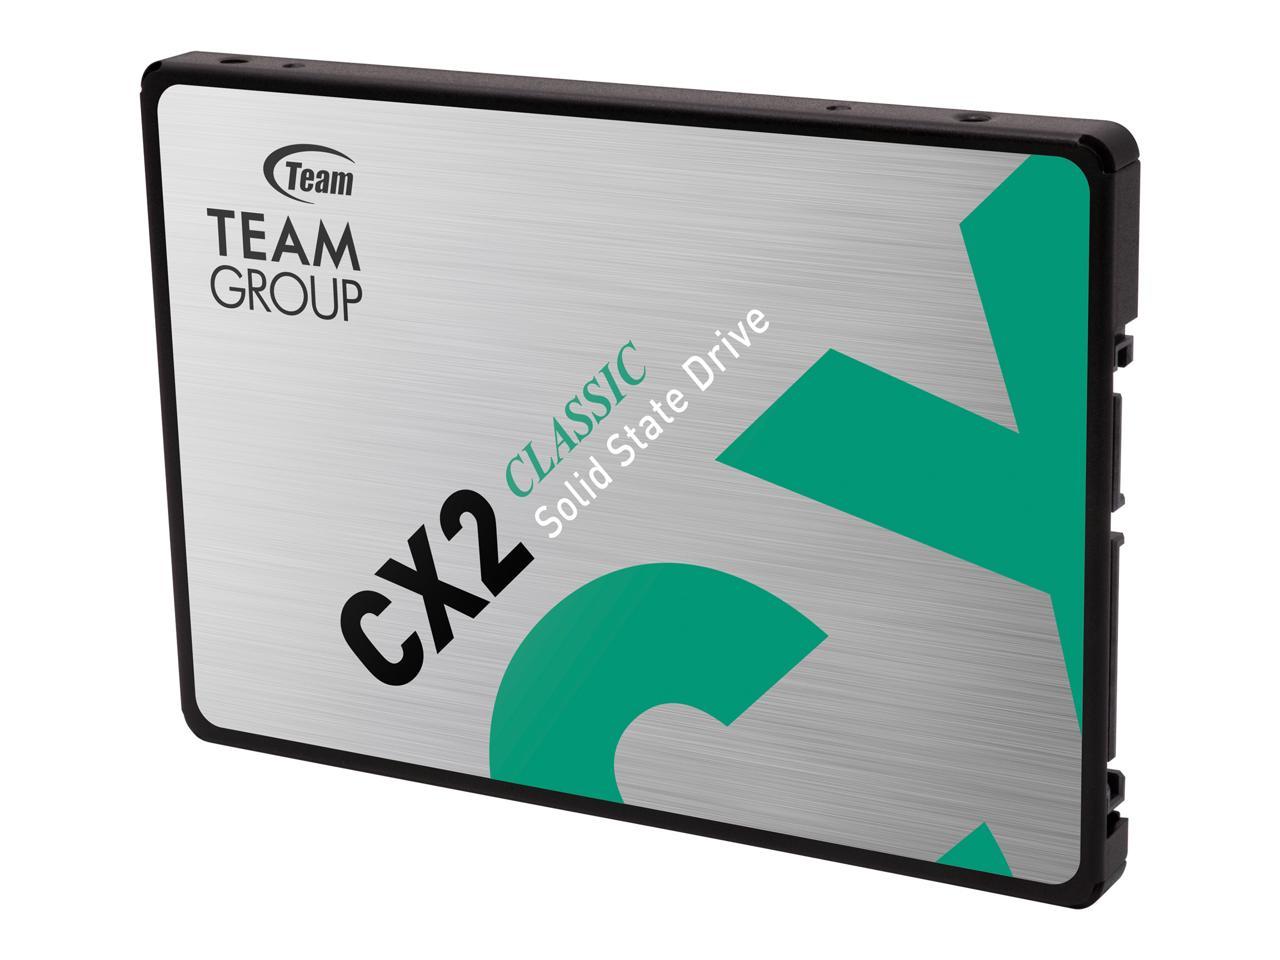 TEAMGROUP CX2 2TB SSD 2.5 Inch, SATA III 3D TLC Internal SSD, Read Speed Up To 540 MBps  (T253X6002T0C101)